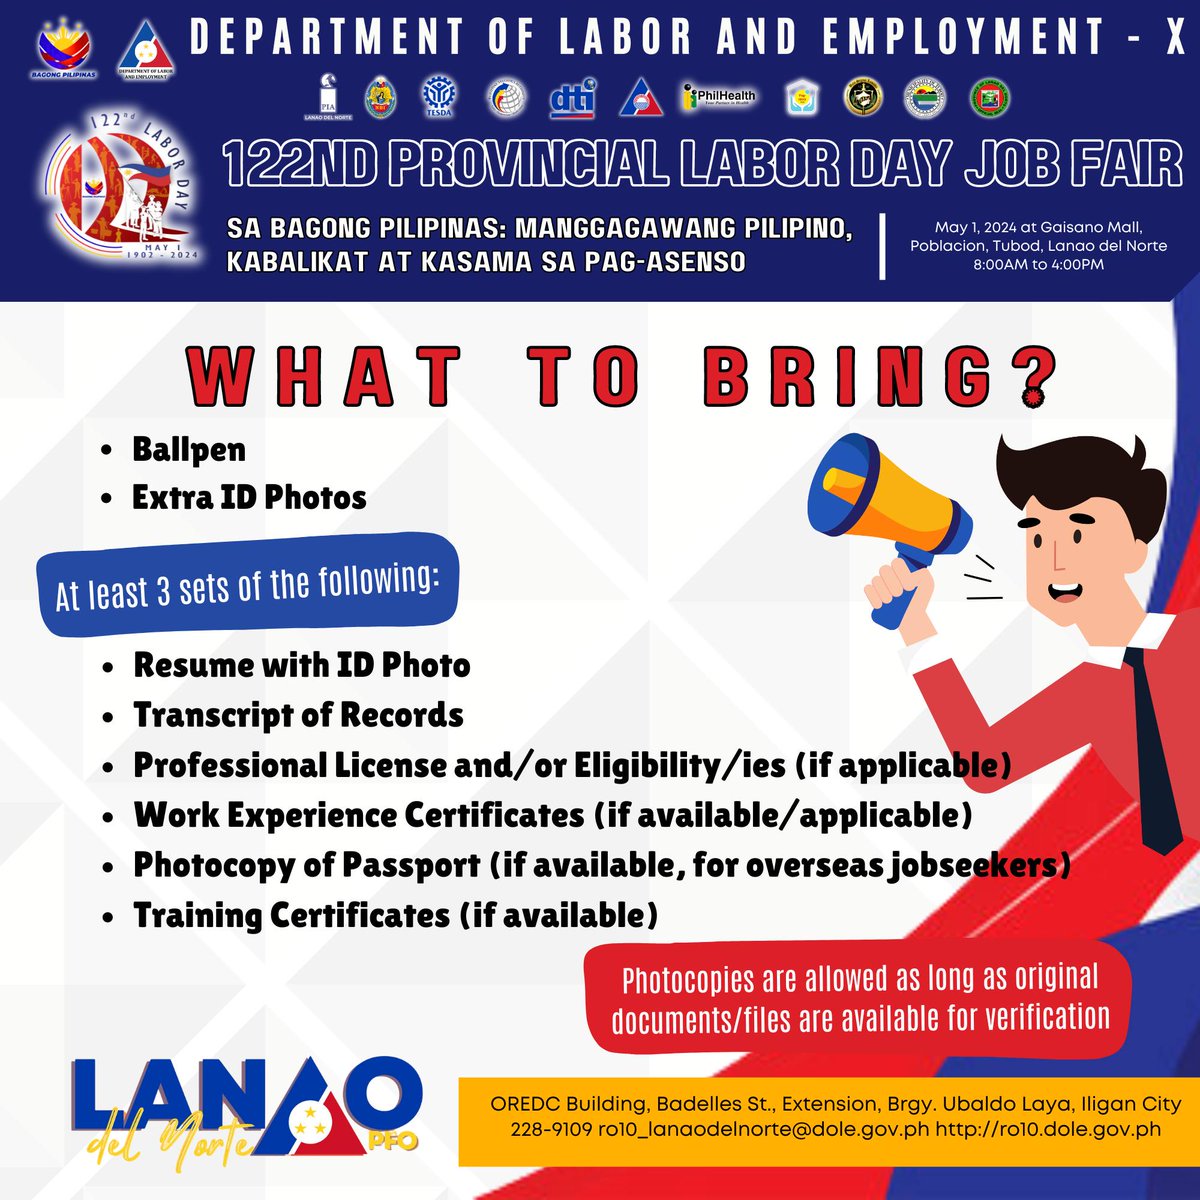 📷 Explore 3000+ job opportunities at the 2024 Provincial Labor Day Job Fair! 📷 Join us on May 1, 2024 at Gaisano Mall Tubod, Lanao del Norte, and discover local and overseas career paths. Don't miss out! Check the attached photos for vacancy details.
#JobFair #LanaoDelNorte…